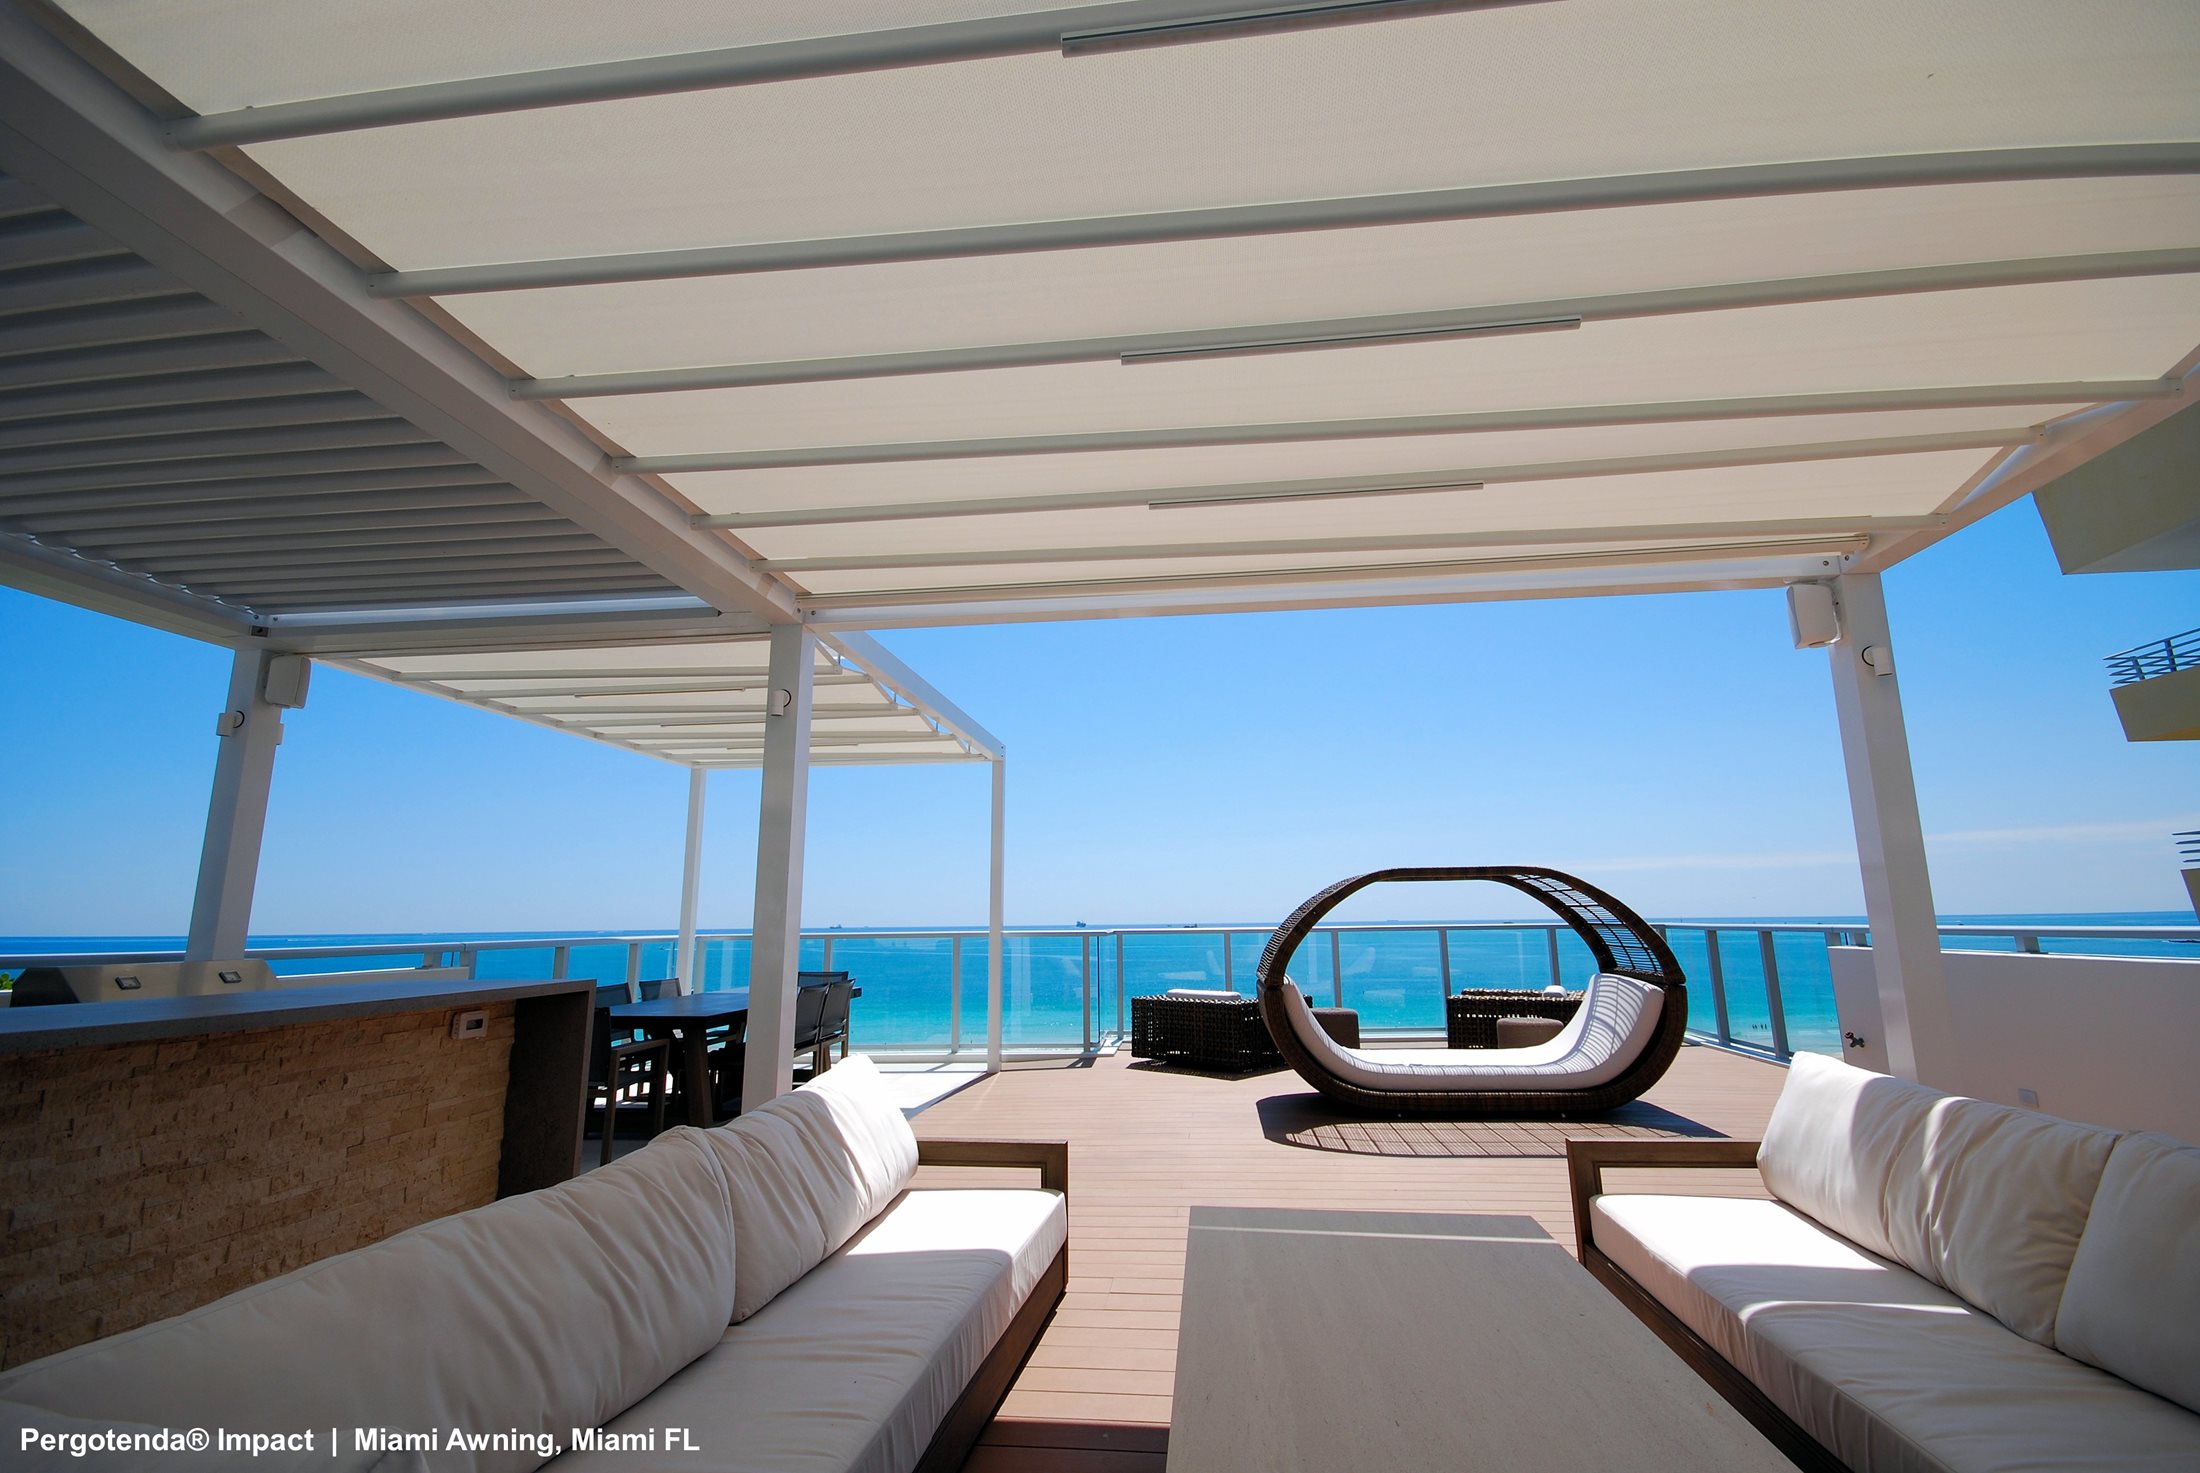 Residence-with-two-Corradi-Shade-Structures-penthouse-area-by-Miami-Awning-Co-(2).jpg